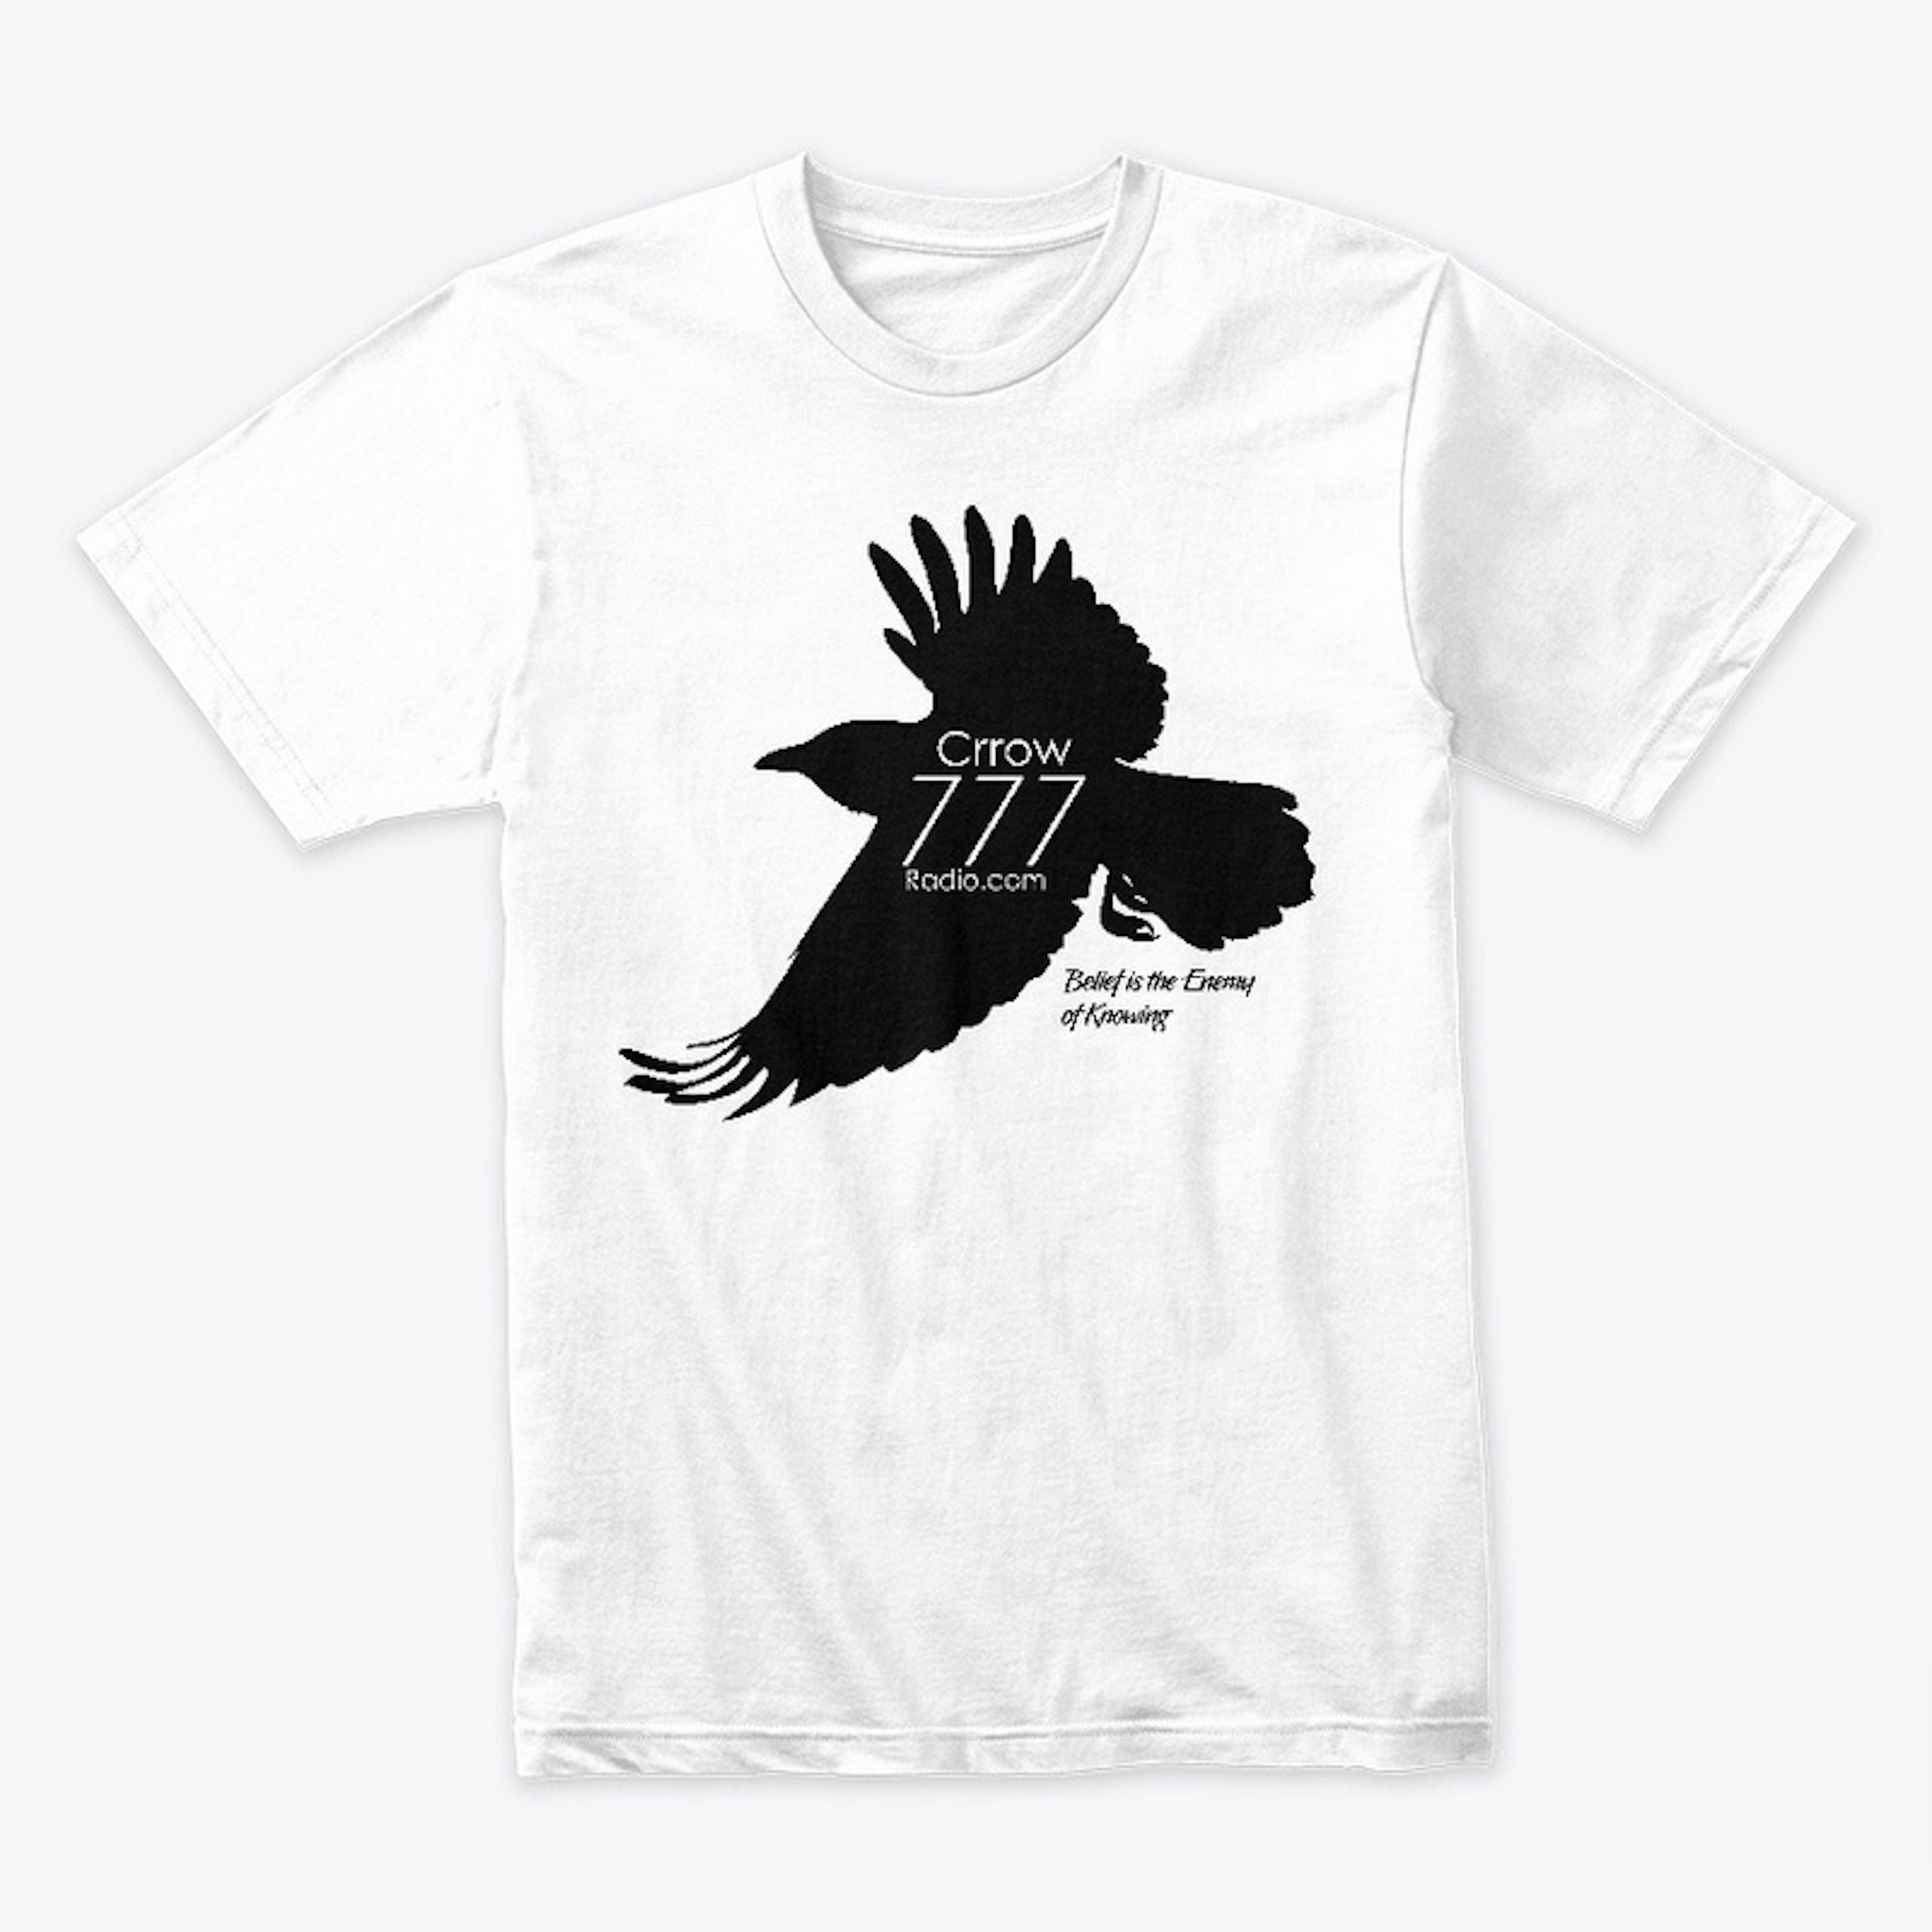 Crrow777 Tee Design 1 for Subscribers